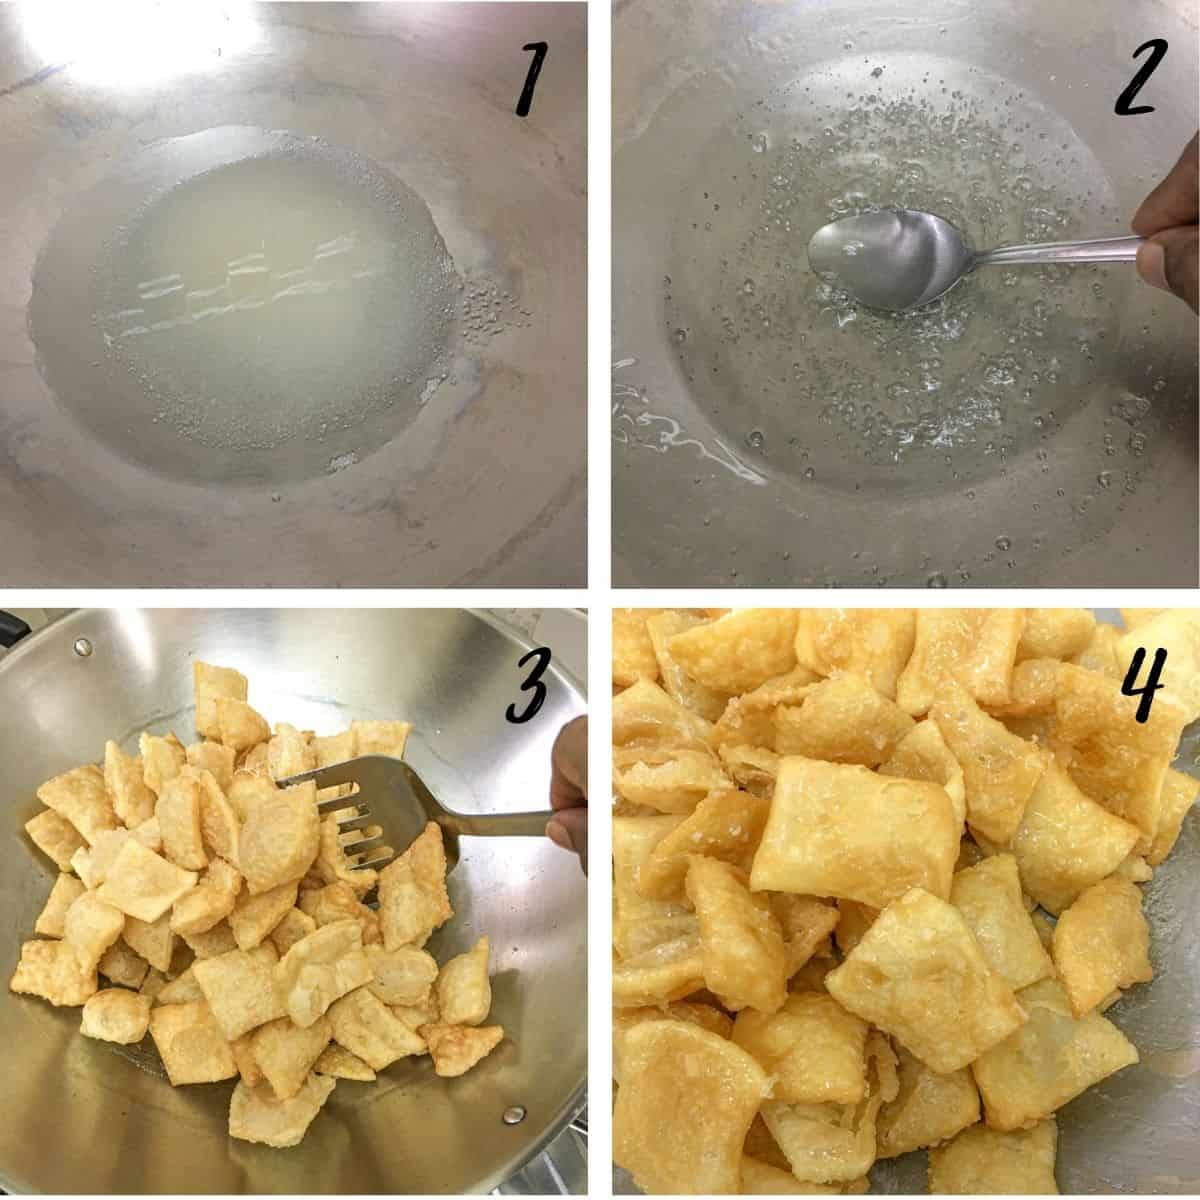 A poster of 4 mages showing sugar and water in a pan, using a spoon to mix the sugar syrup, mixing fried dough in a pan and sugar syrup coated dough bites in a pan